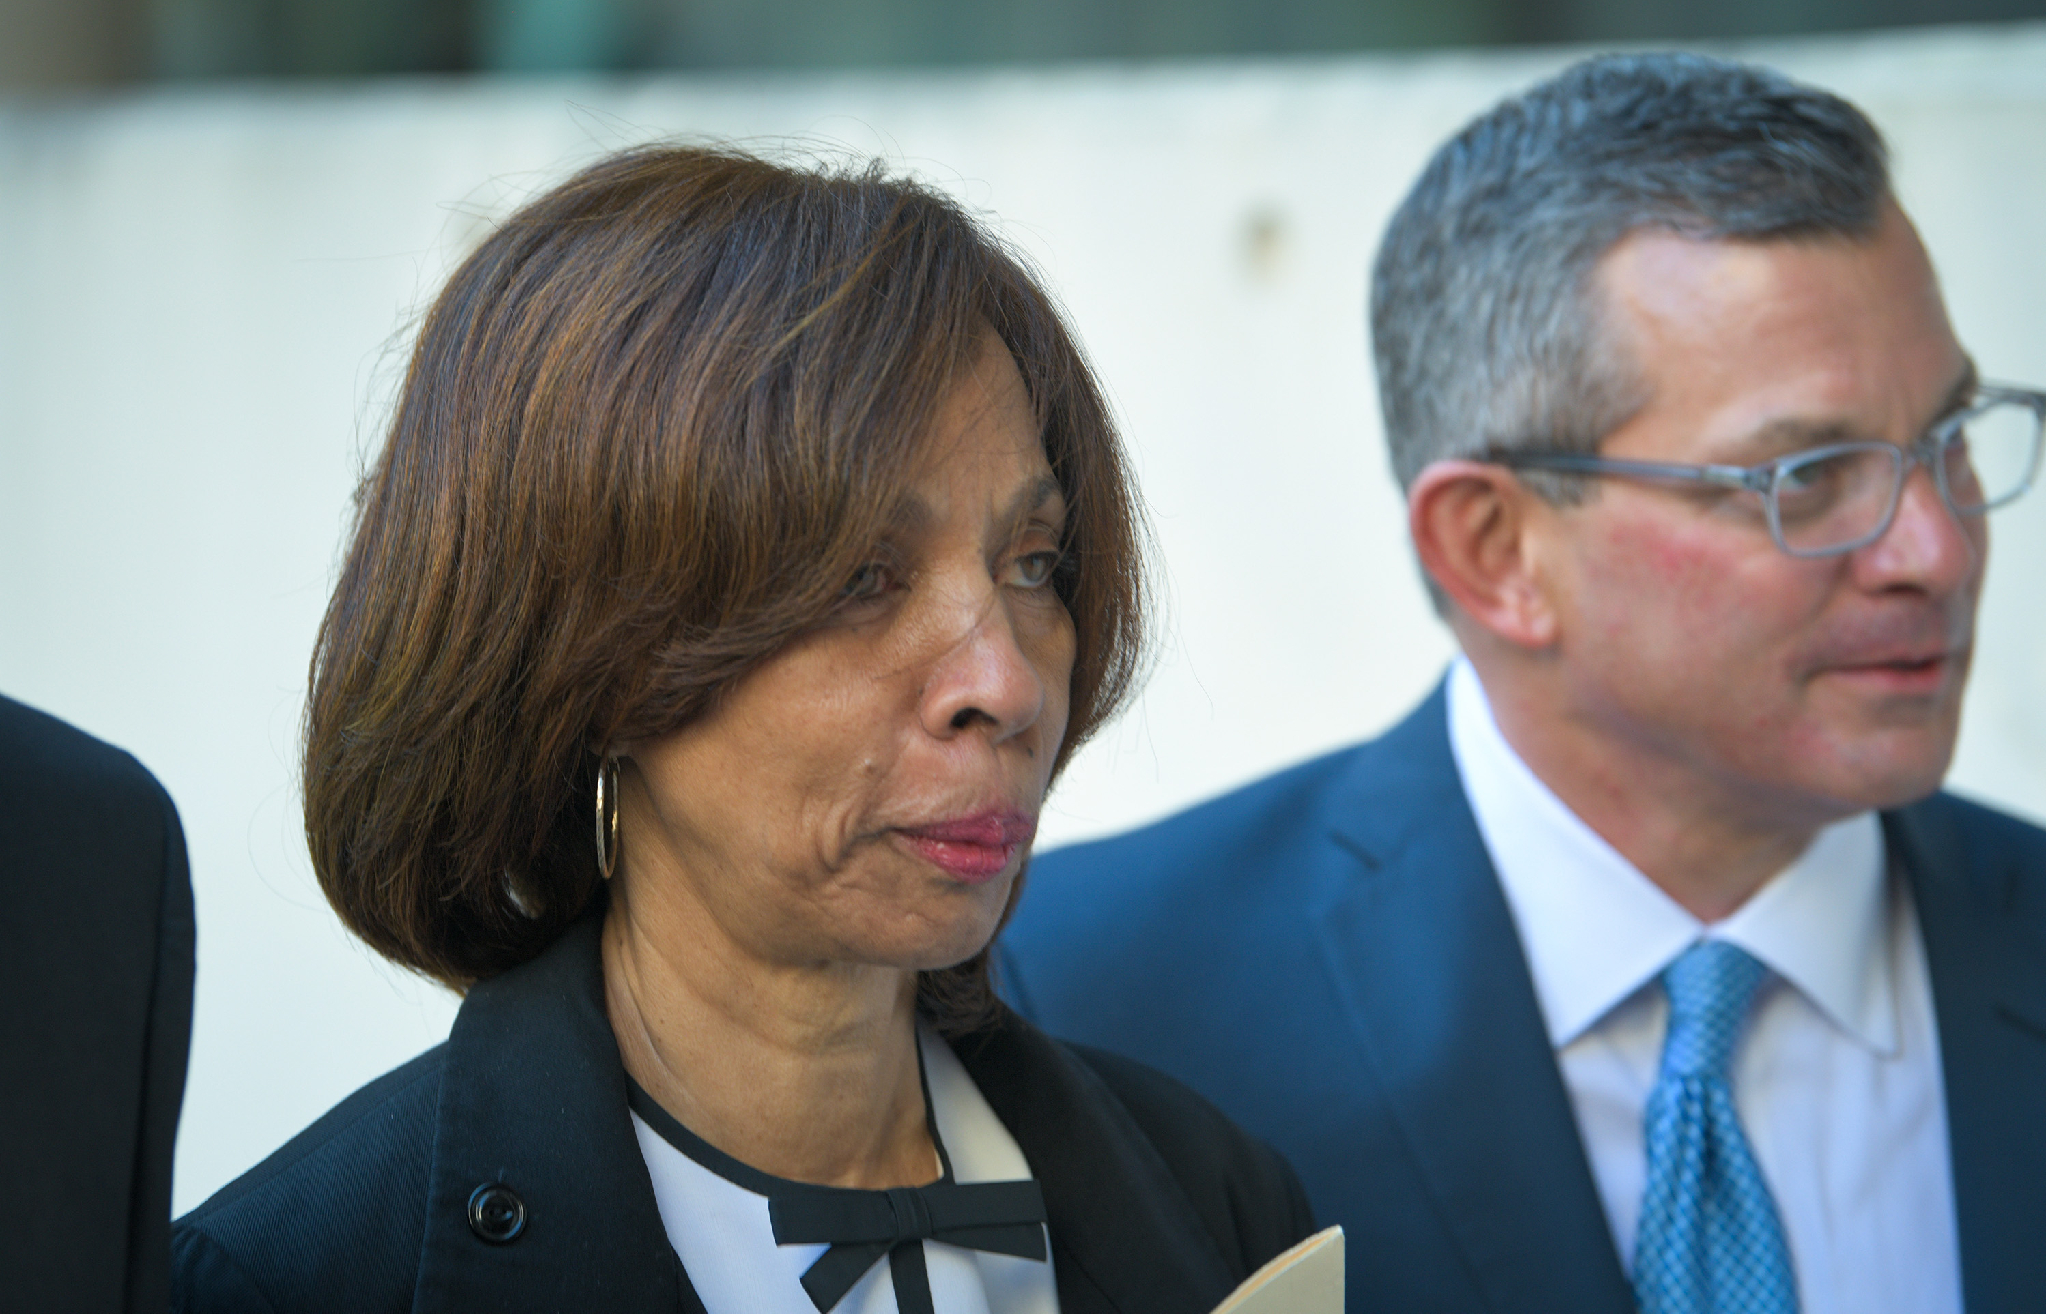 Former Baltimore Mayor Catherine E. Pugh arrives at U.S. District Court for sentencing for her fraud conviction in 2020.